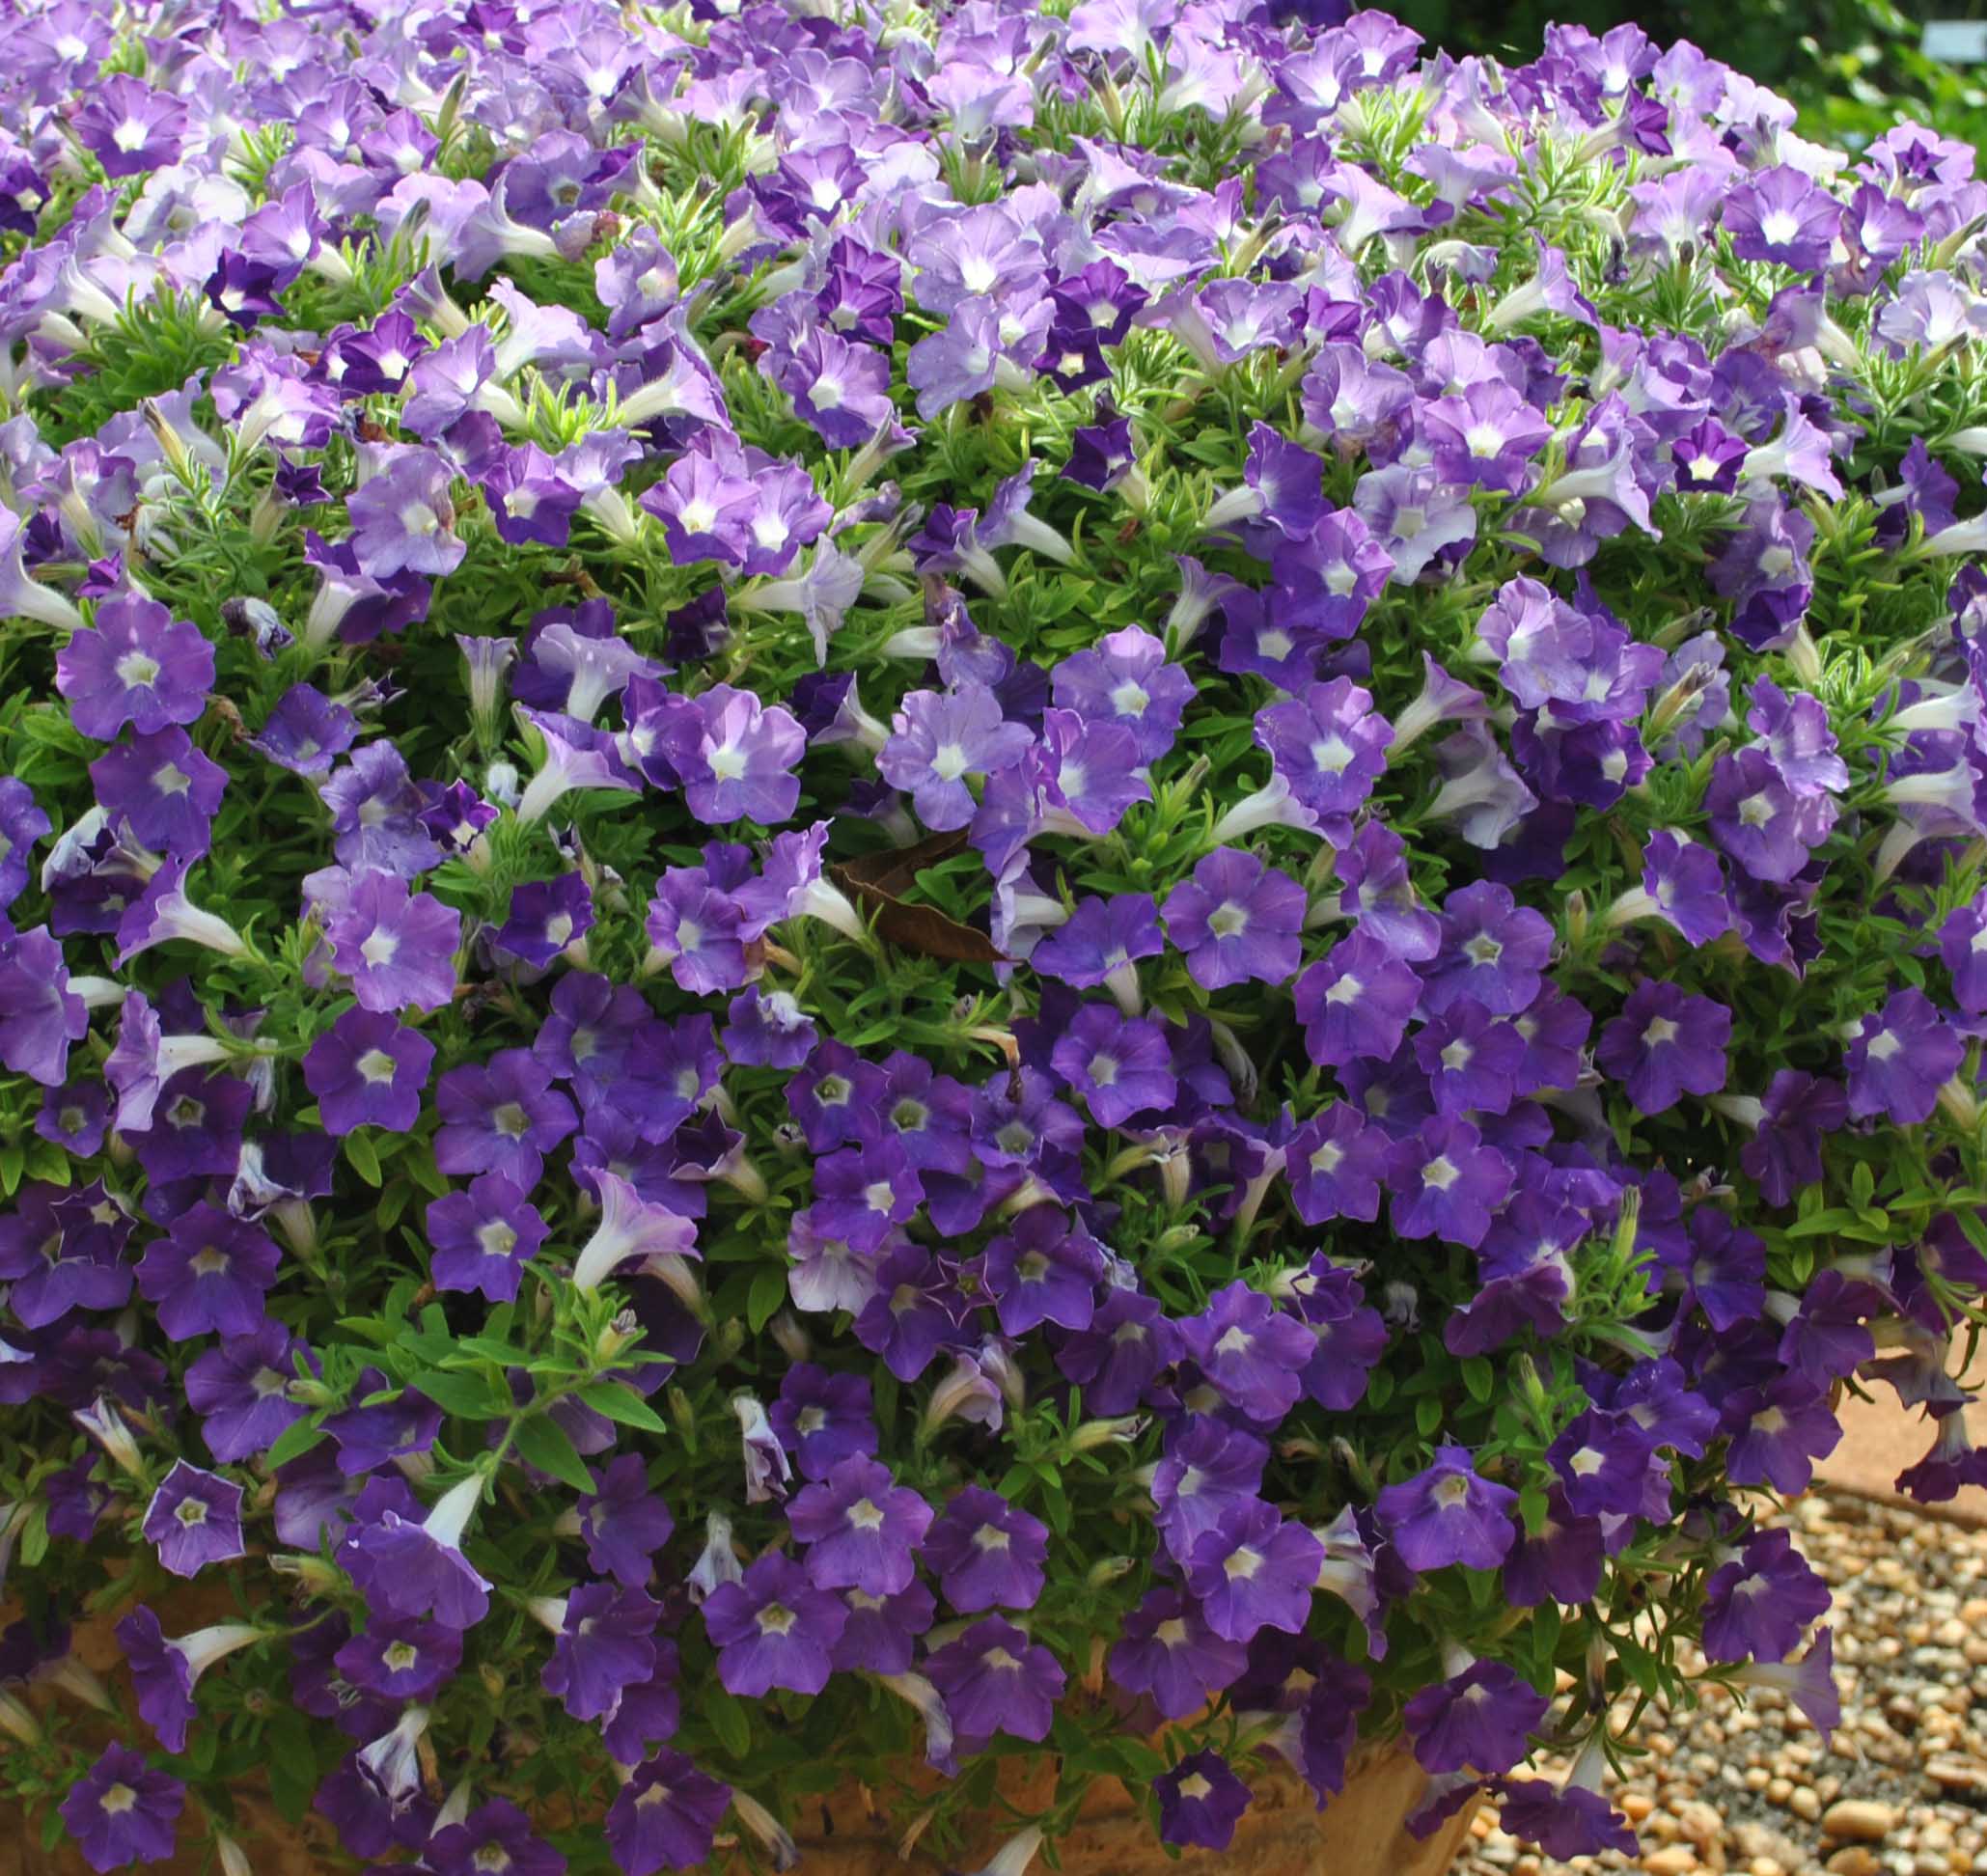 “Petunia 'Supertunia Morning Glory Charm' performed perfectly through the hot summer. It quickly formed a mound of small violet blooms with a large white eye. This petunia was loaded with so many small blooms even in the hottest months of the summer. It never ceased to be a perfect sphere of violet with only bits of green visible.”